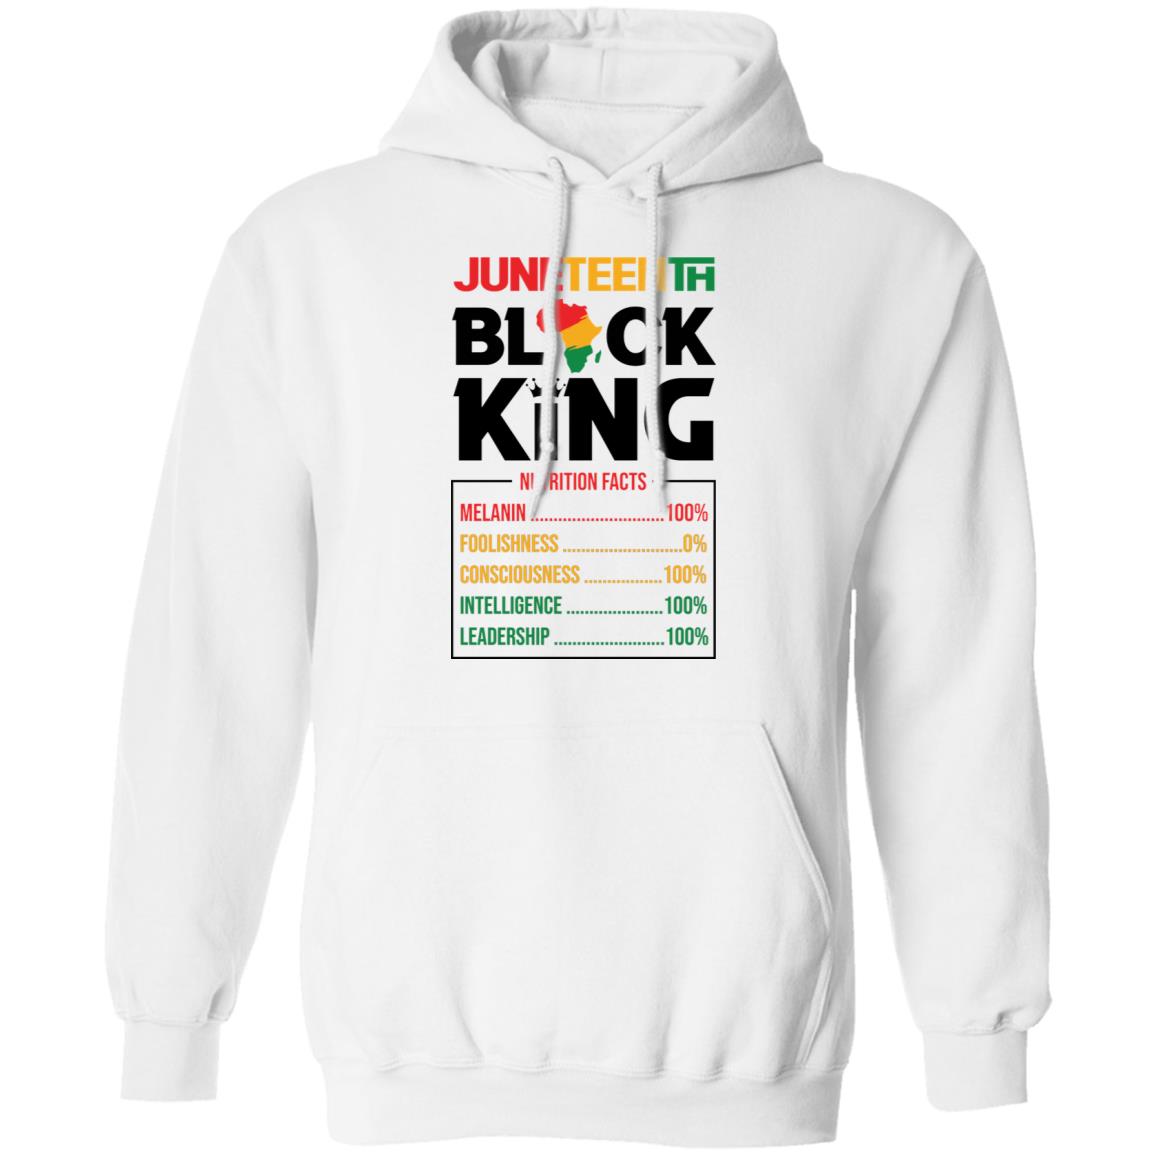 Juneteenth Black King Nutrition Facts T-shirt Apparel Gearment Unisex Hoodie White S